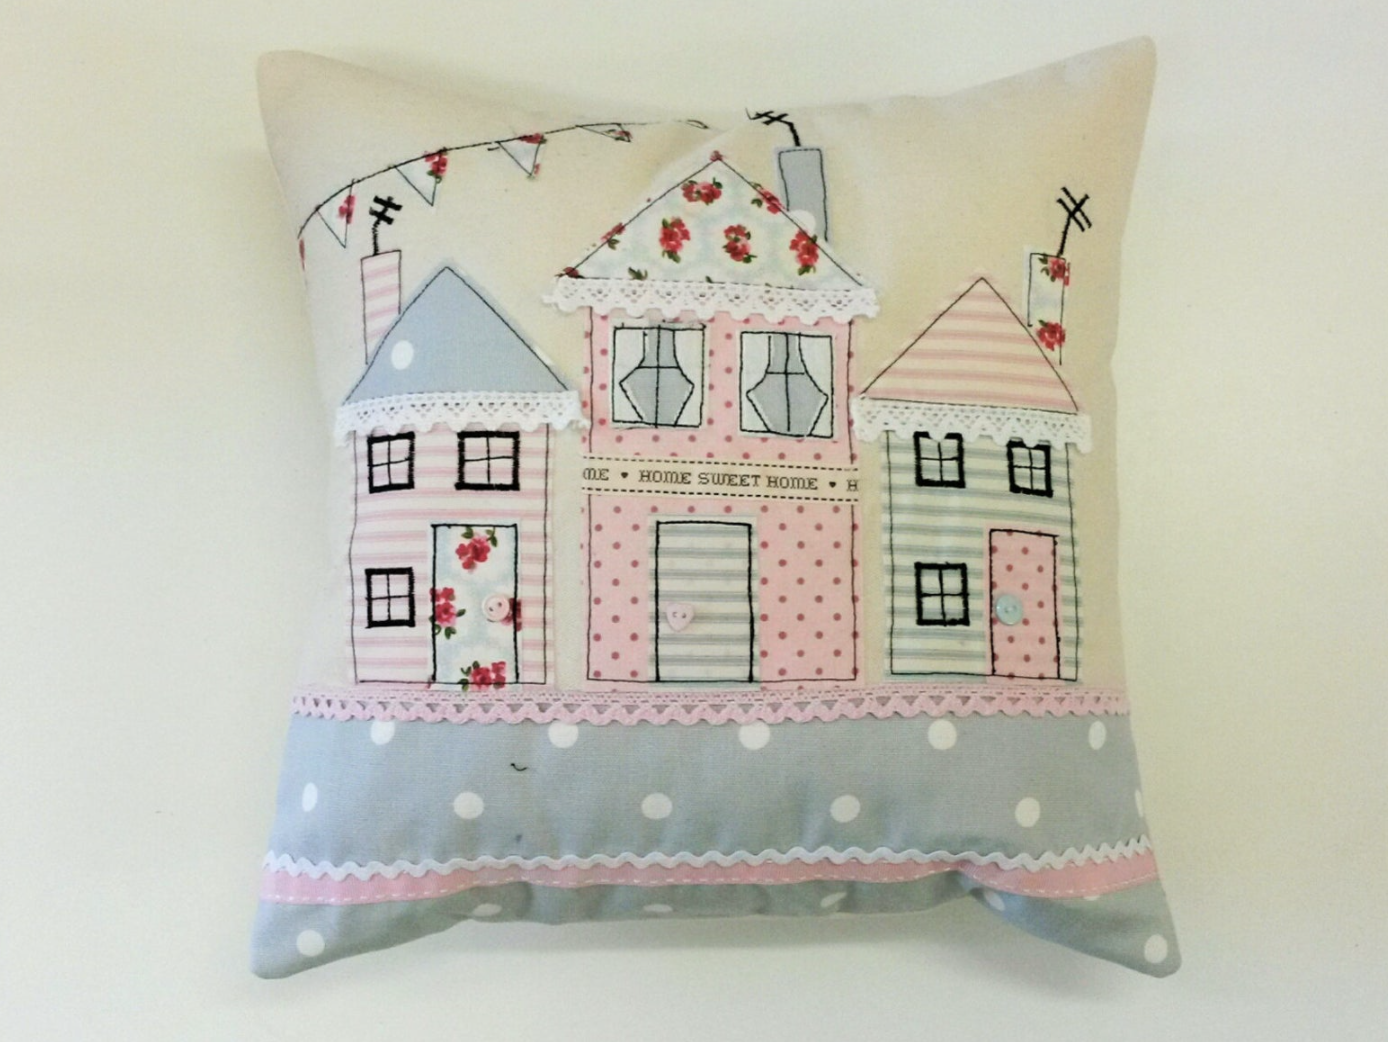 Home sweet home cushion sewing pattern